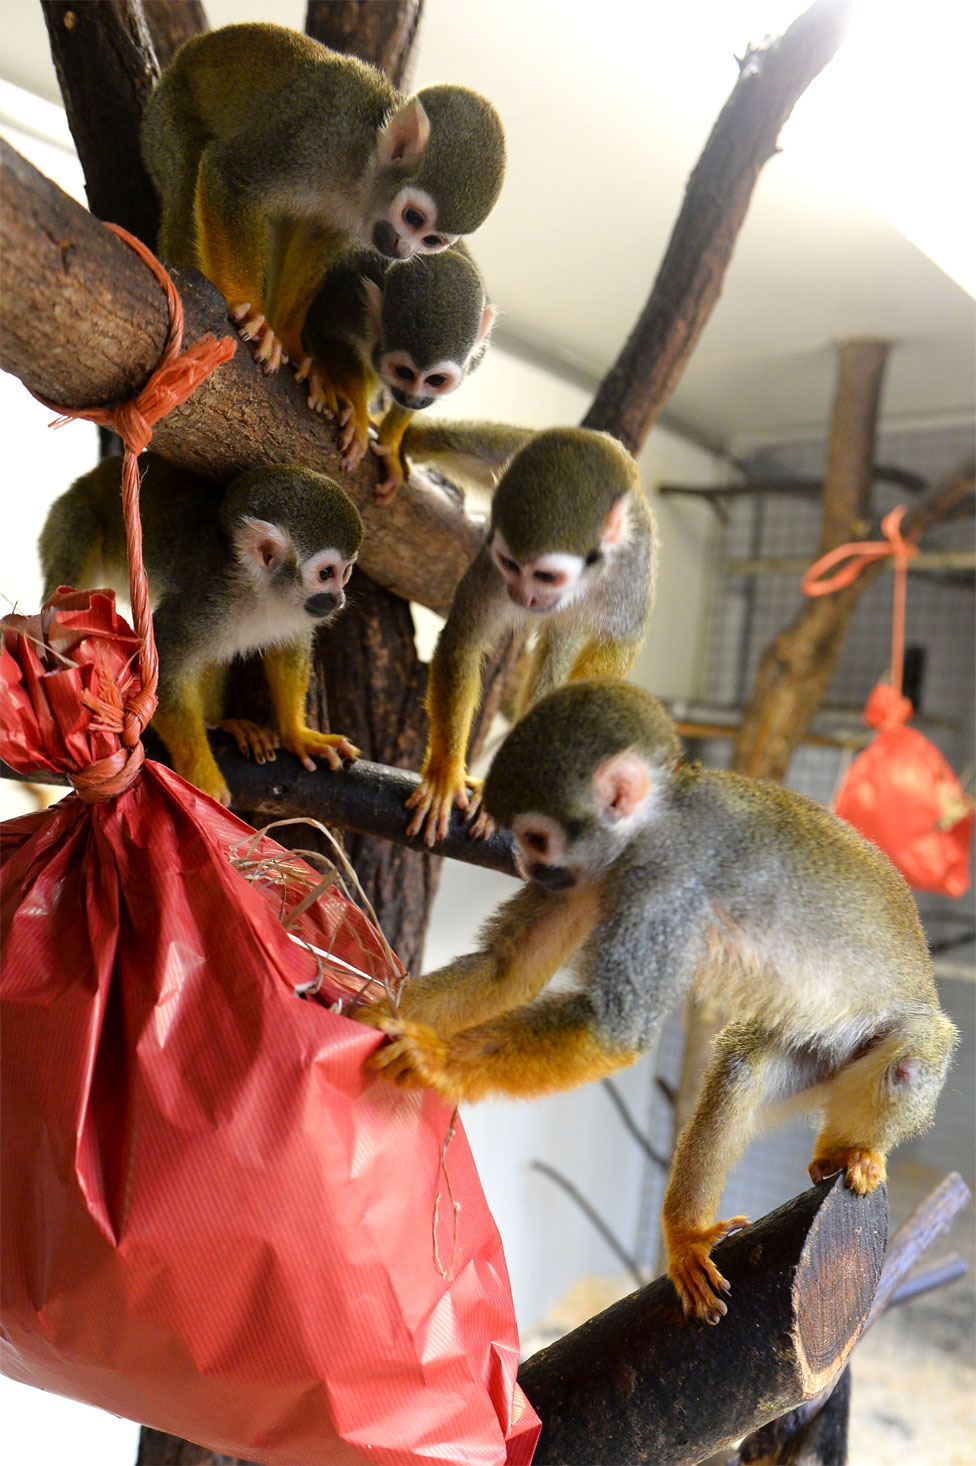 Squirrel monkeys explore their Christmas package